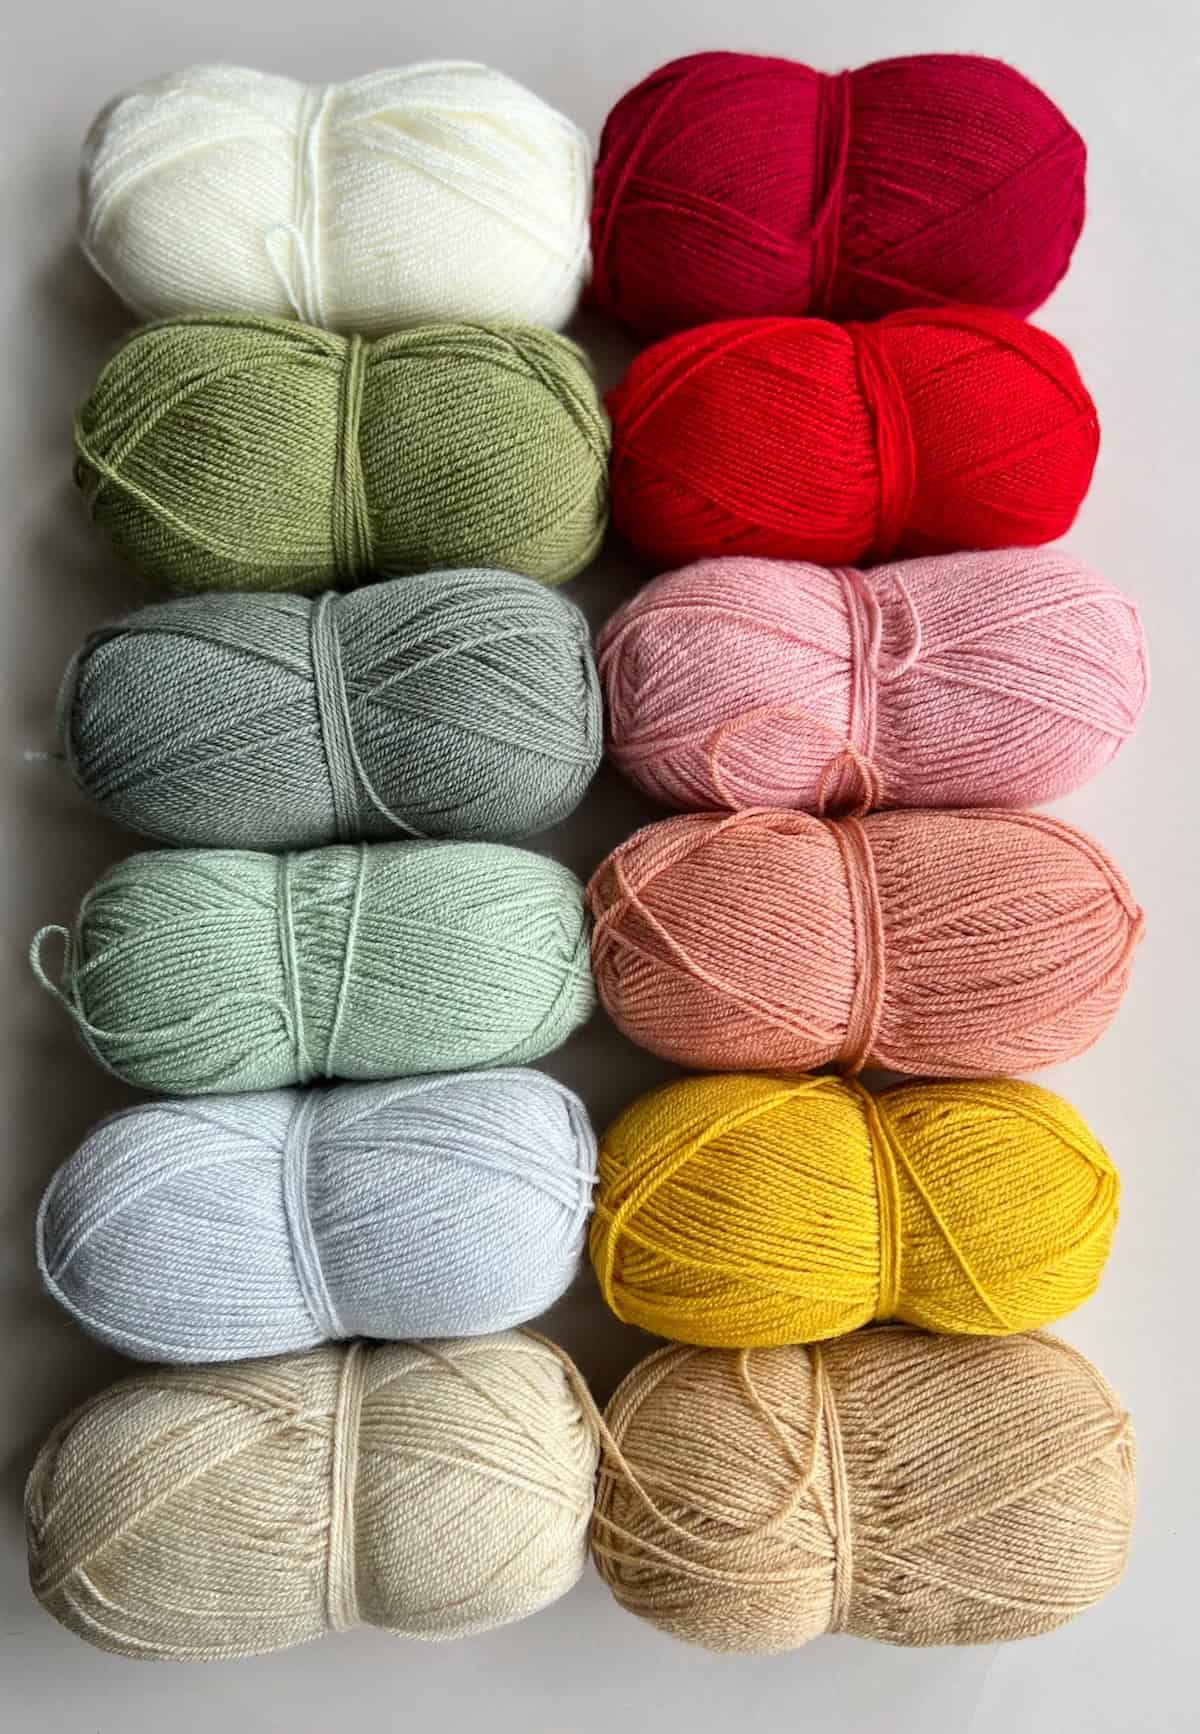 Image showing 12 shades of Paintbox Simply DK yarn used for the Strawberries and Cream crochet blanket pattern.